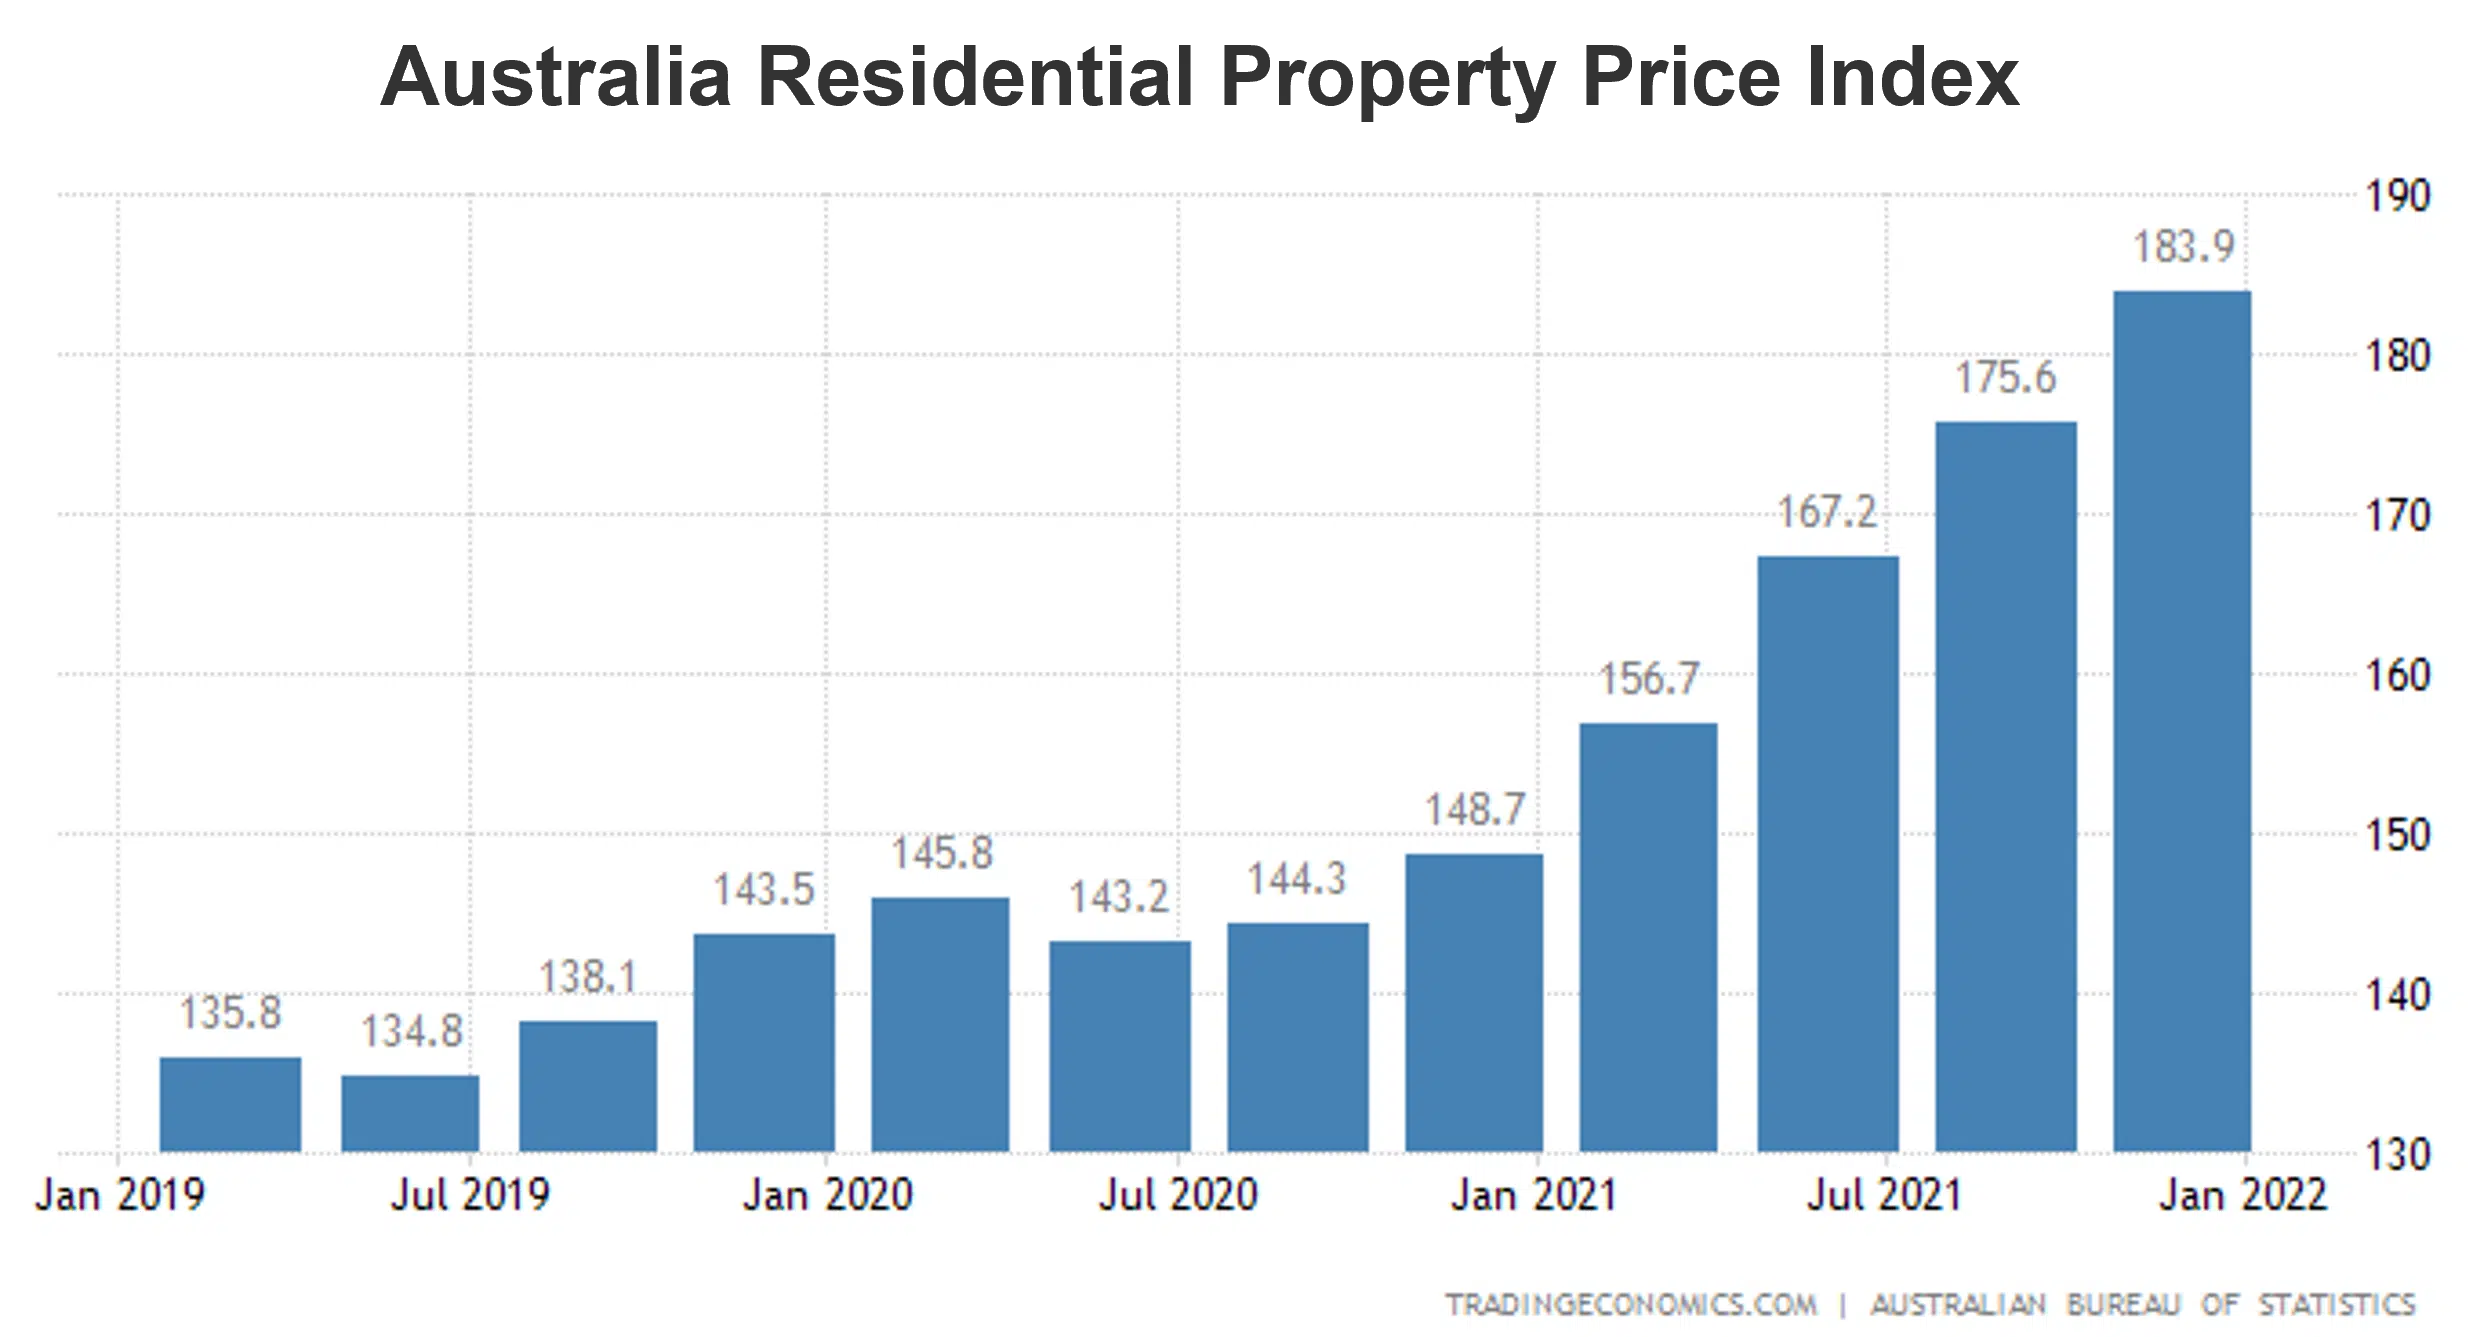 Bar chart showing Australian residential property price index from January 2019 to January 2022